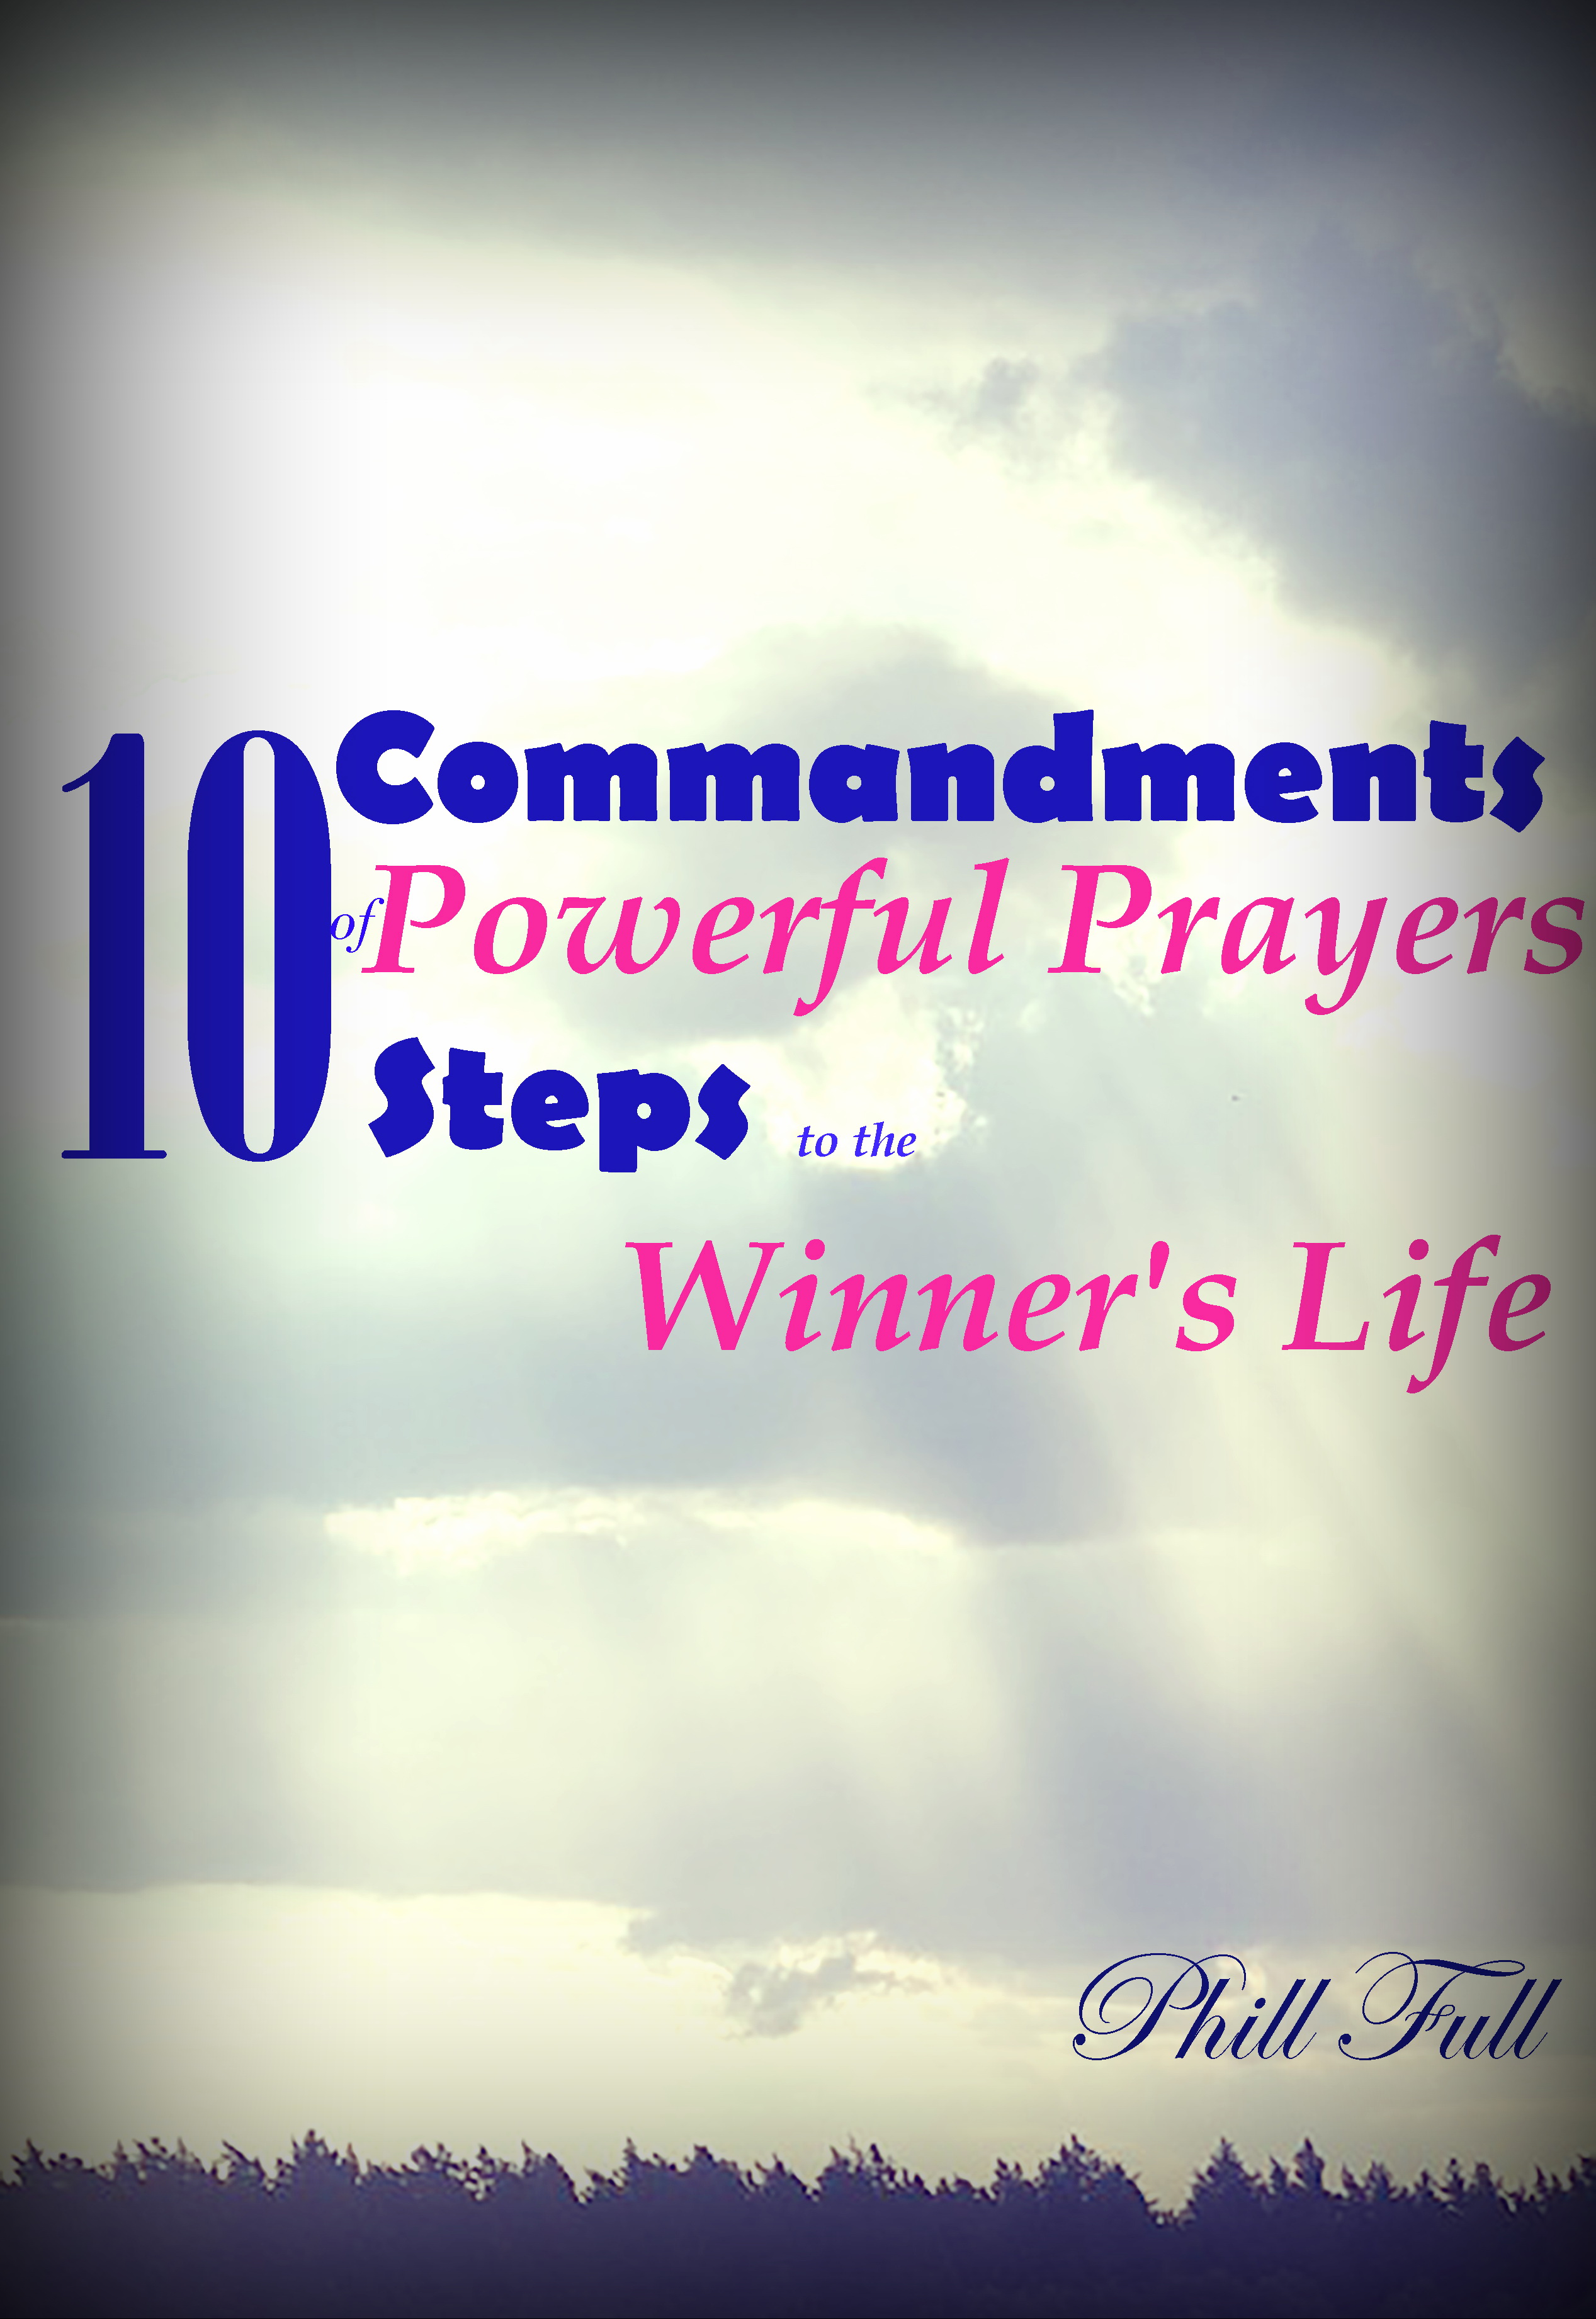 FREE: Ten Commandments of the Powerful Prayers: Ten Steps to the Winner’s Life by Phill Full by Phill Full